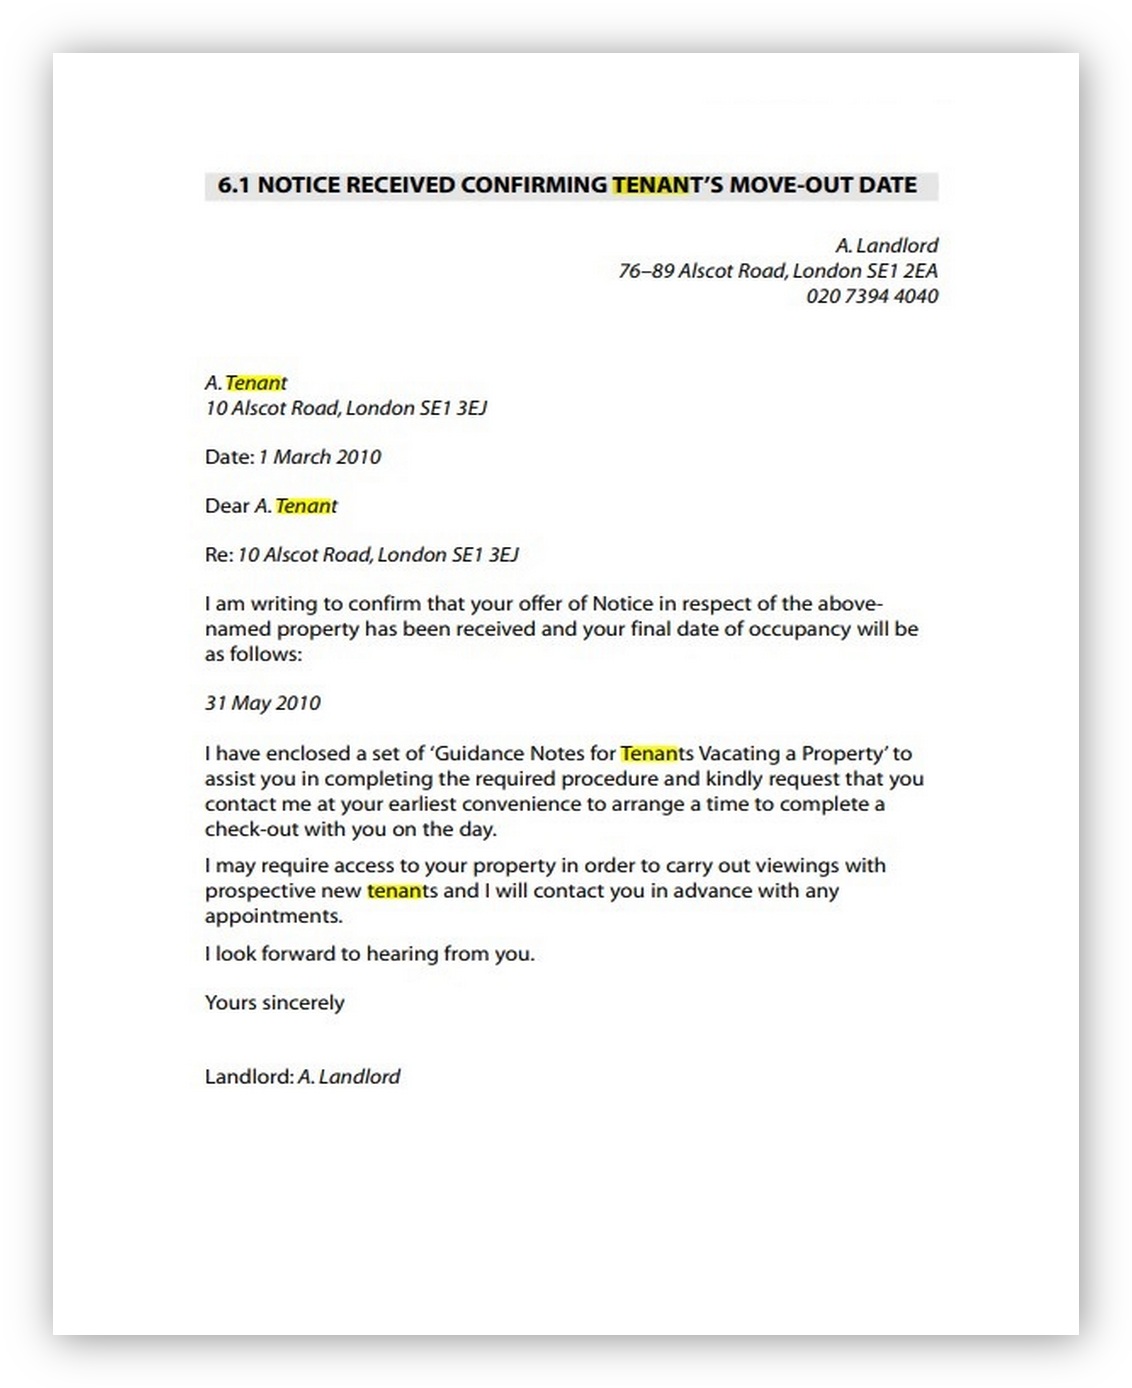 Letter of Reference Tenant02